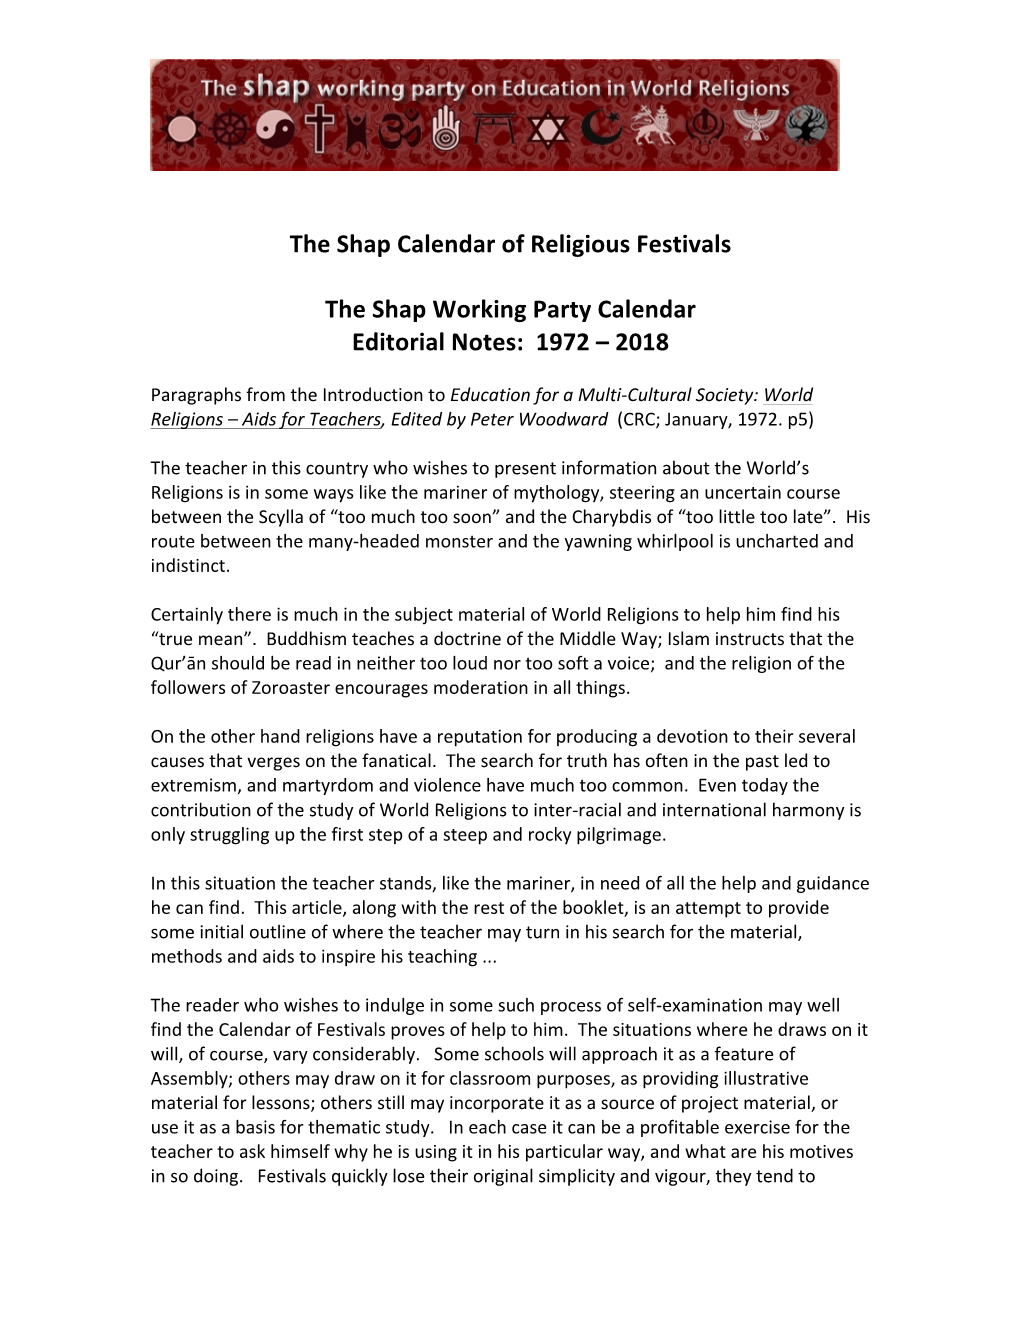 The Shap Calendar of Religious Festivals the Shap Working Party Calendar Editorial Notes: 1972 – 2018